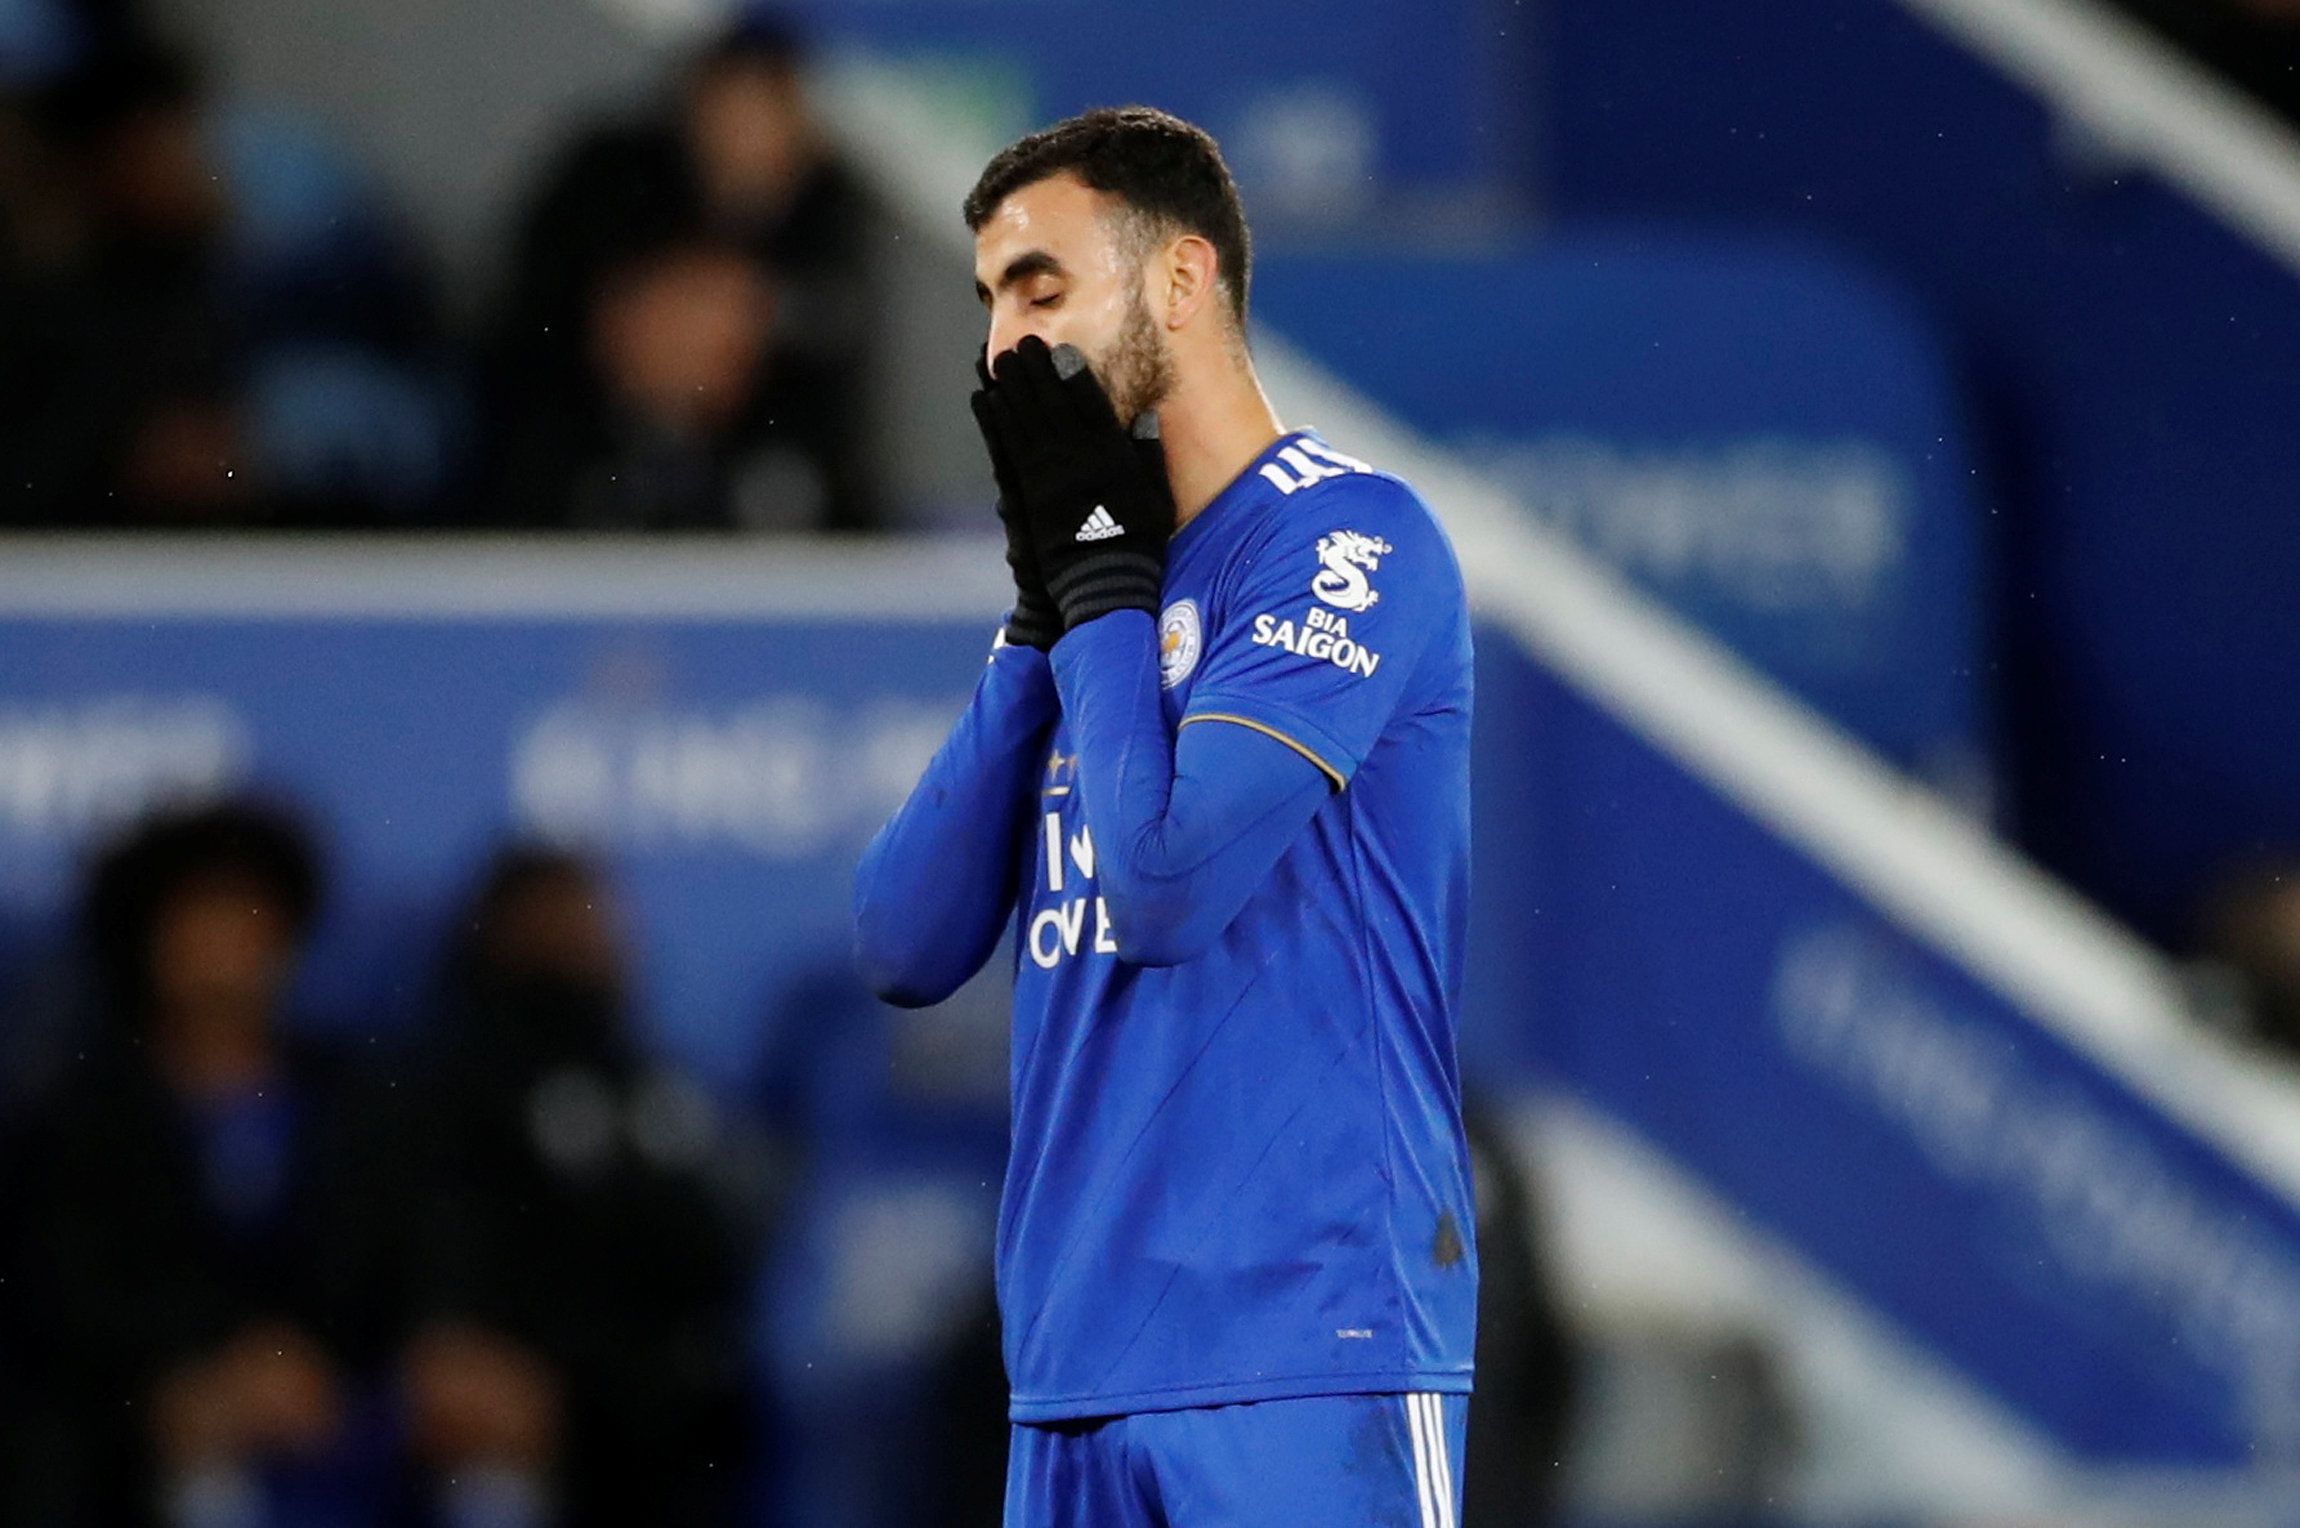 Soccer Football - Premier League - Leicester City v Southampton - King Power Stadium, Leicester, Britain - January 12, 2019  Leicester City's Rachid Ghezzal reacts  Action Images via Reuters/Carl Recine  EDITORIAL USE ONLY. No use with unauthorized audio, video, data, fixture lists, club/league logos or 